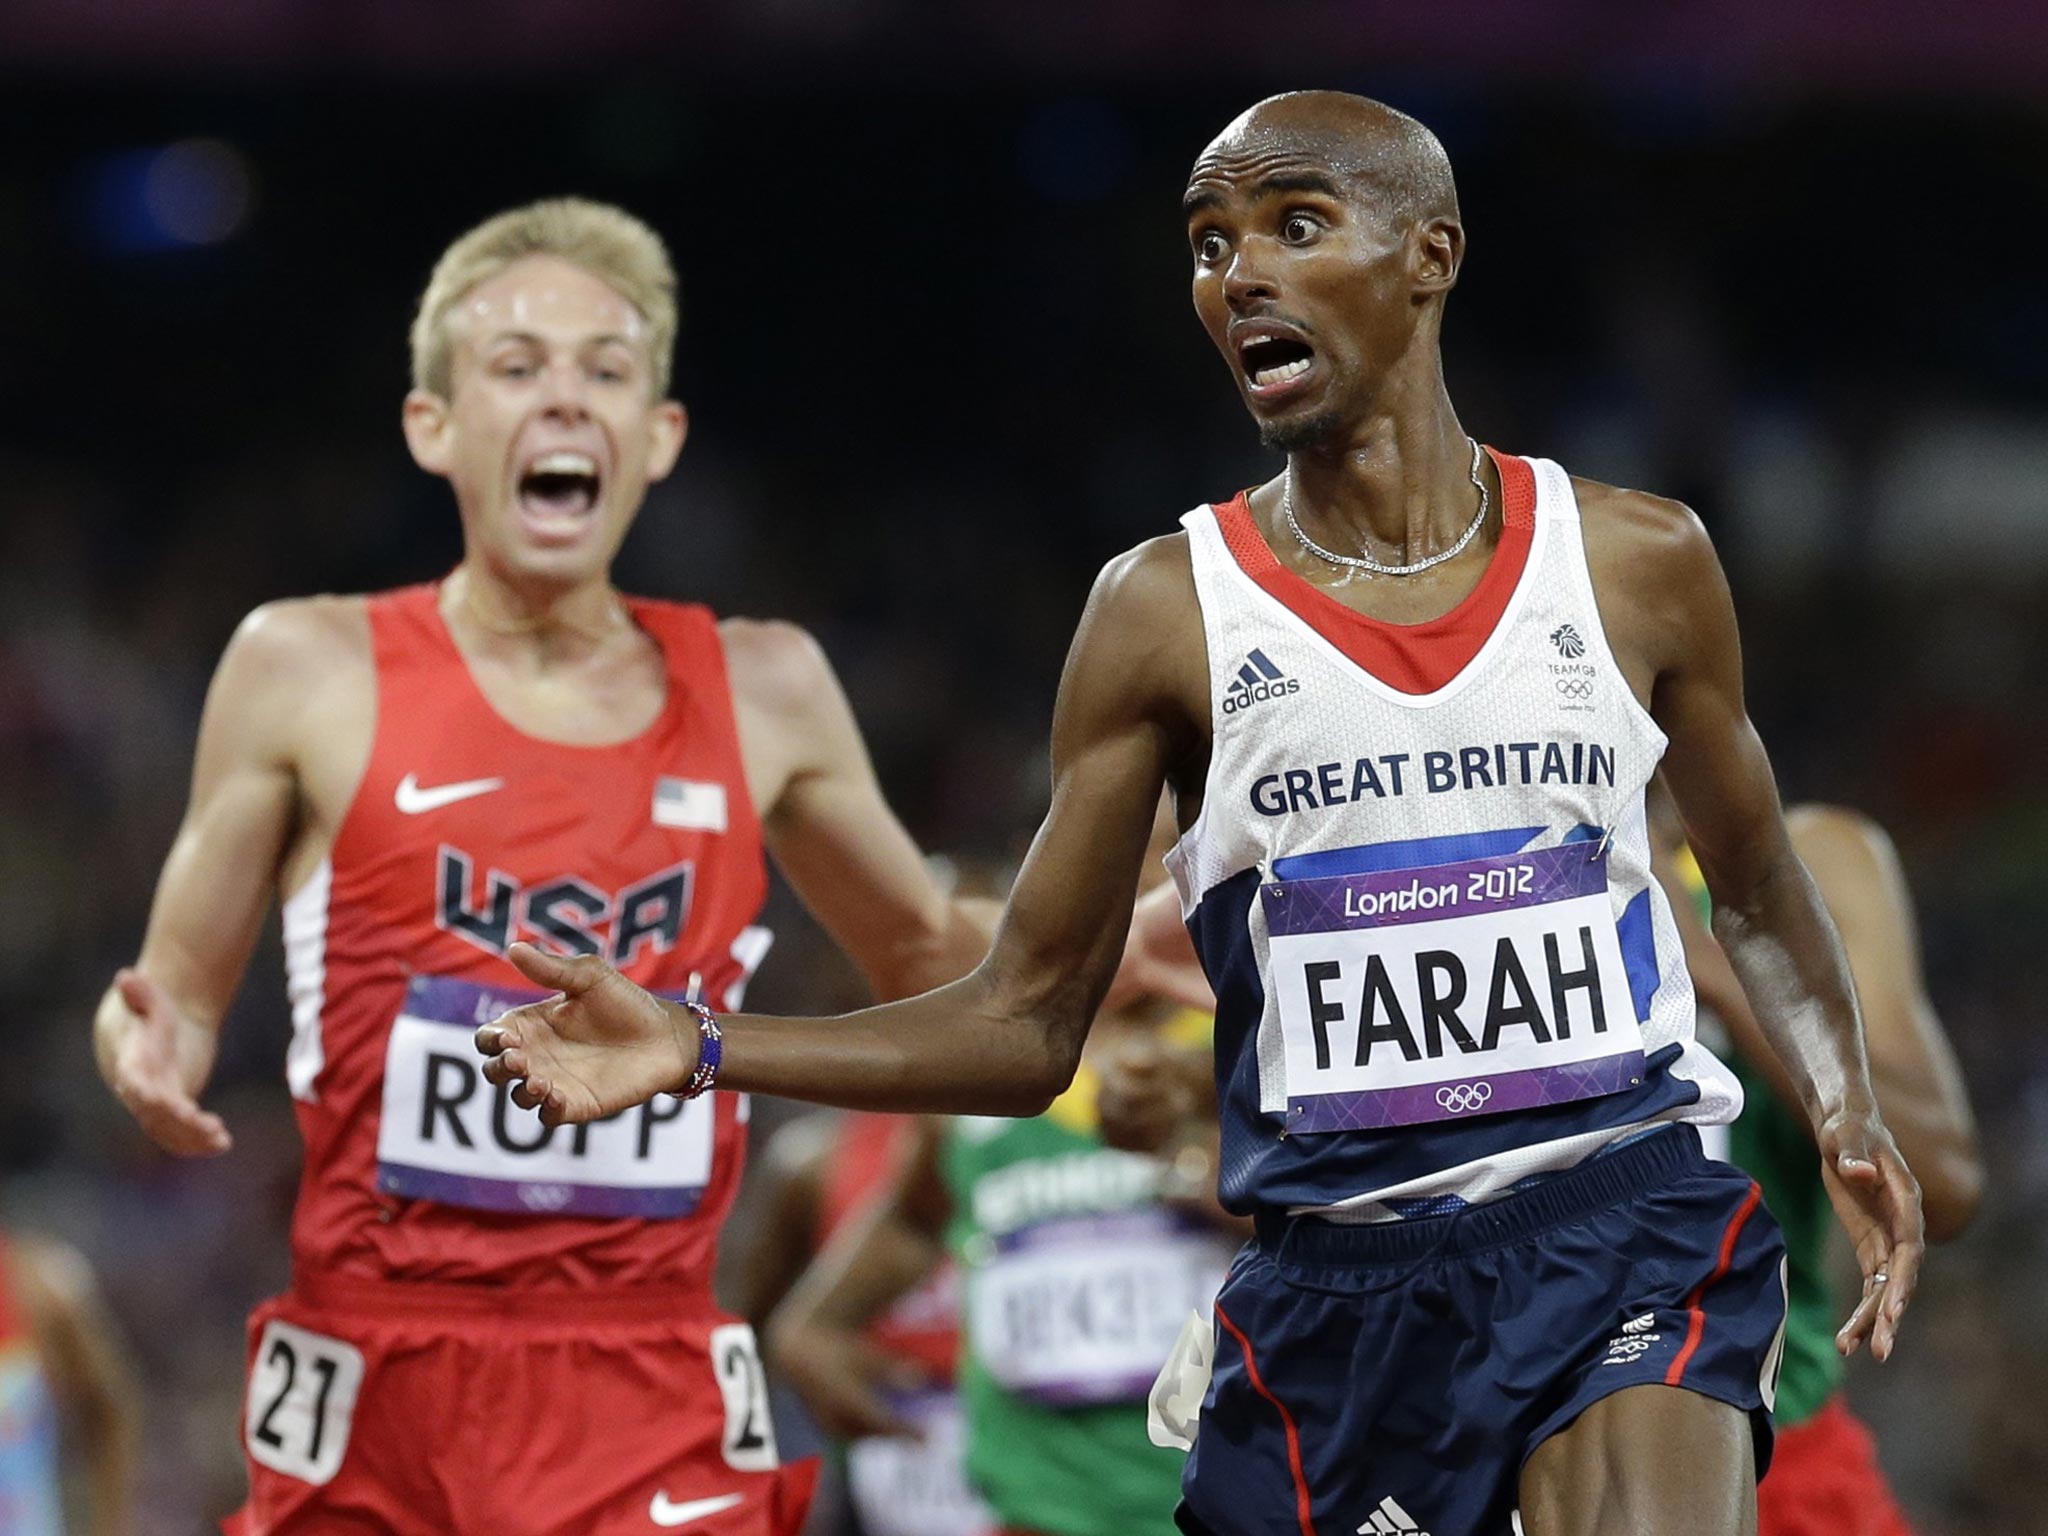 Mo Farah (right) crosses the line to win 10,000m gold ahead of Rupp in 2012